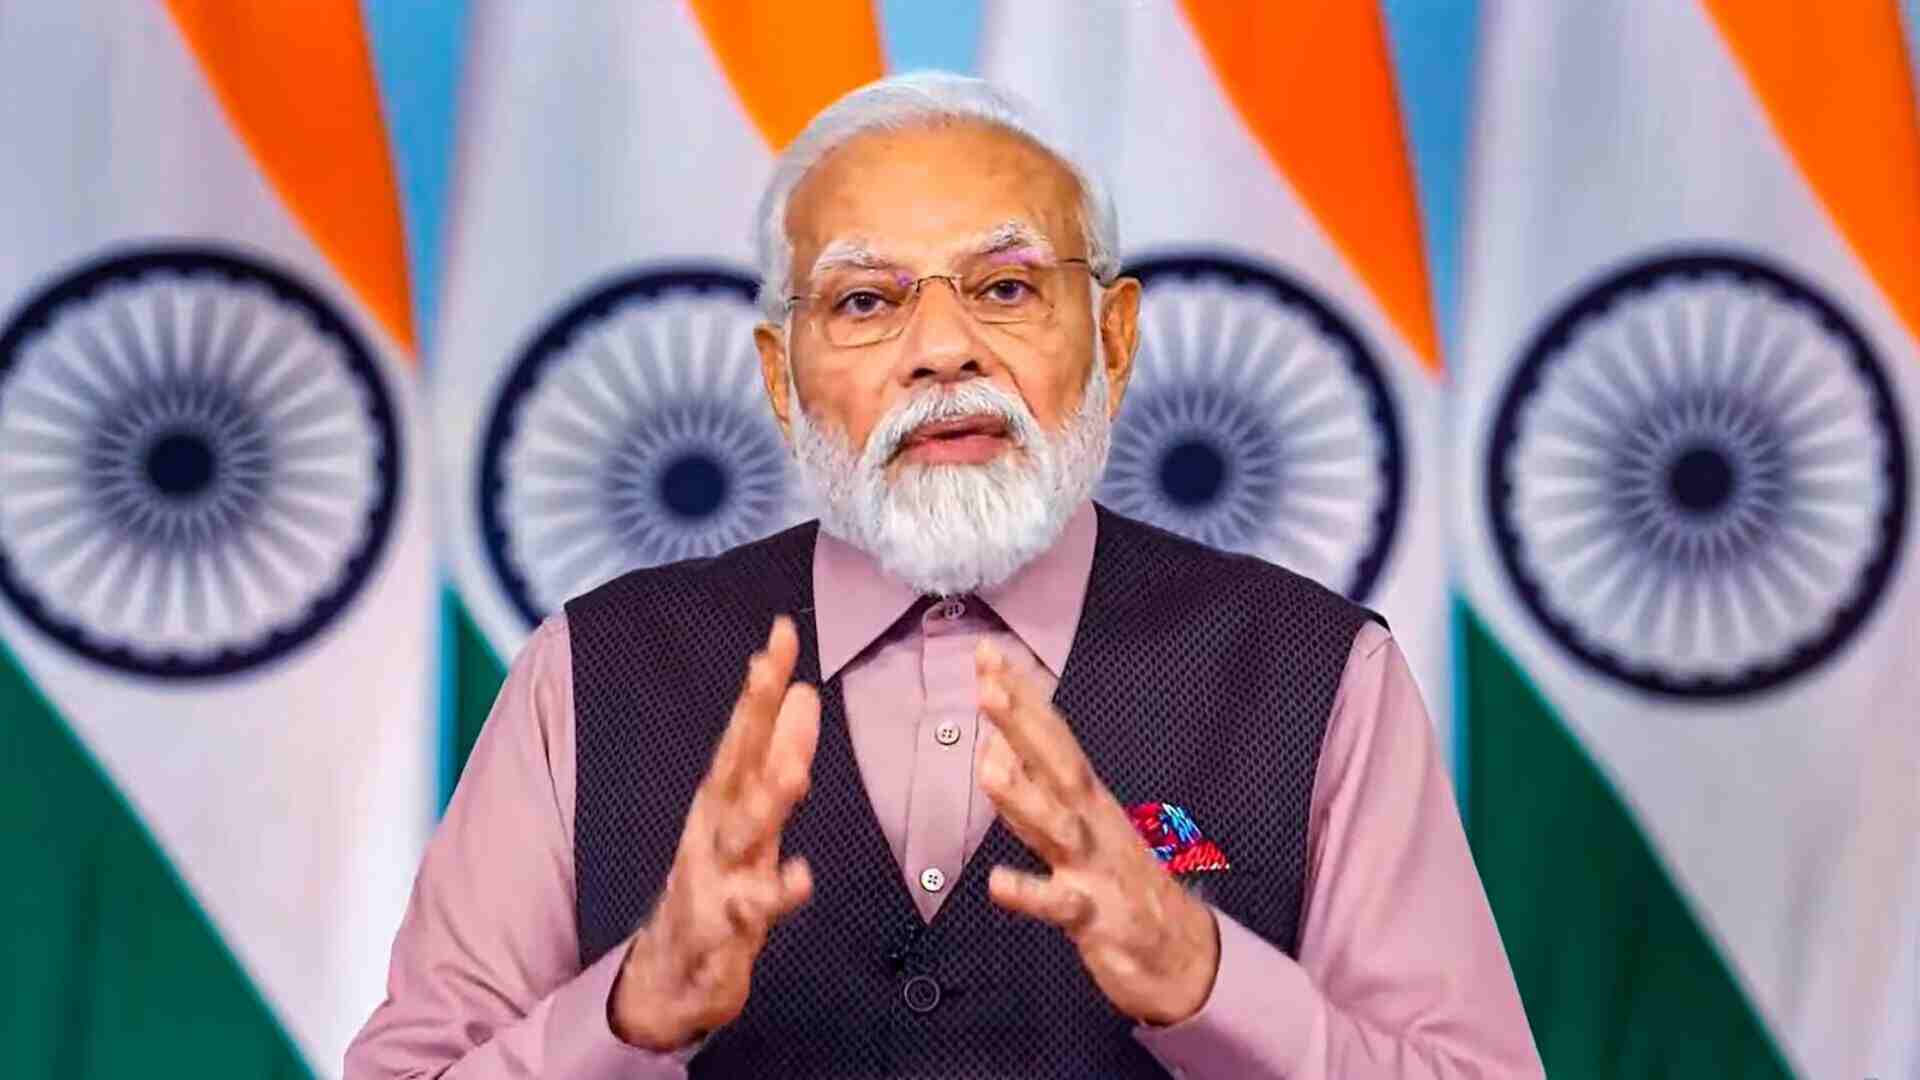 PM Modi Encourages High Voter Turnout as Phase 1 of LS Polls Commences